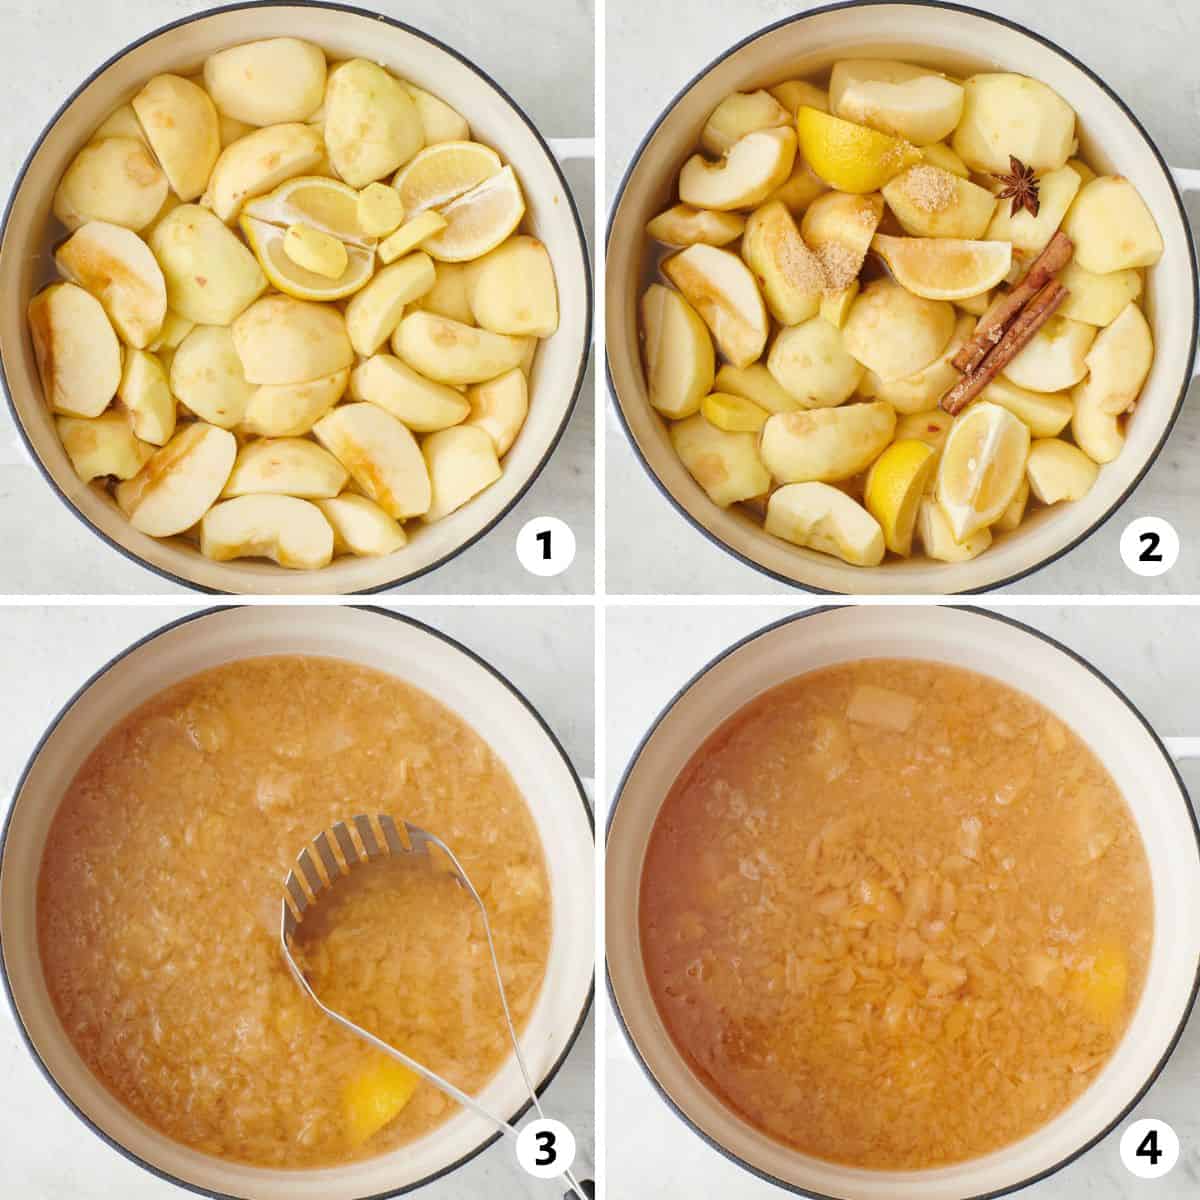 4 image collage making recipe in a pot: 1- chopped apples, ginger, and lemon wedges in pot, 2- cinnamon sticks, sugar, and star anise added, 3- mashing apples, 4- after apples have cooked and reduced.